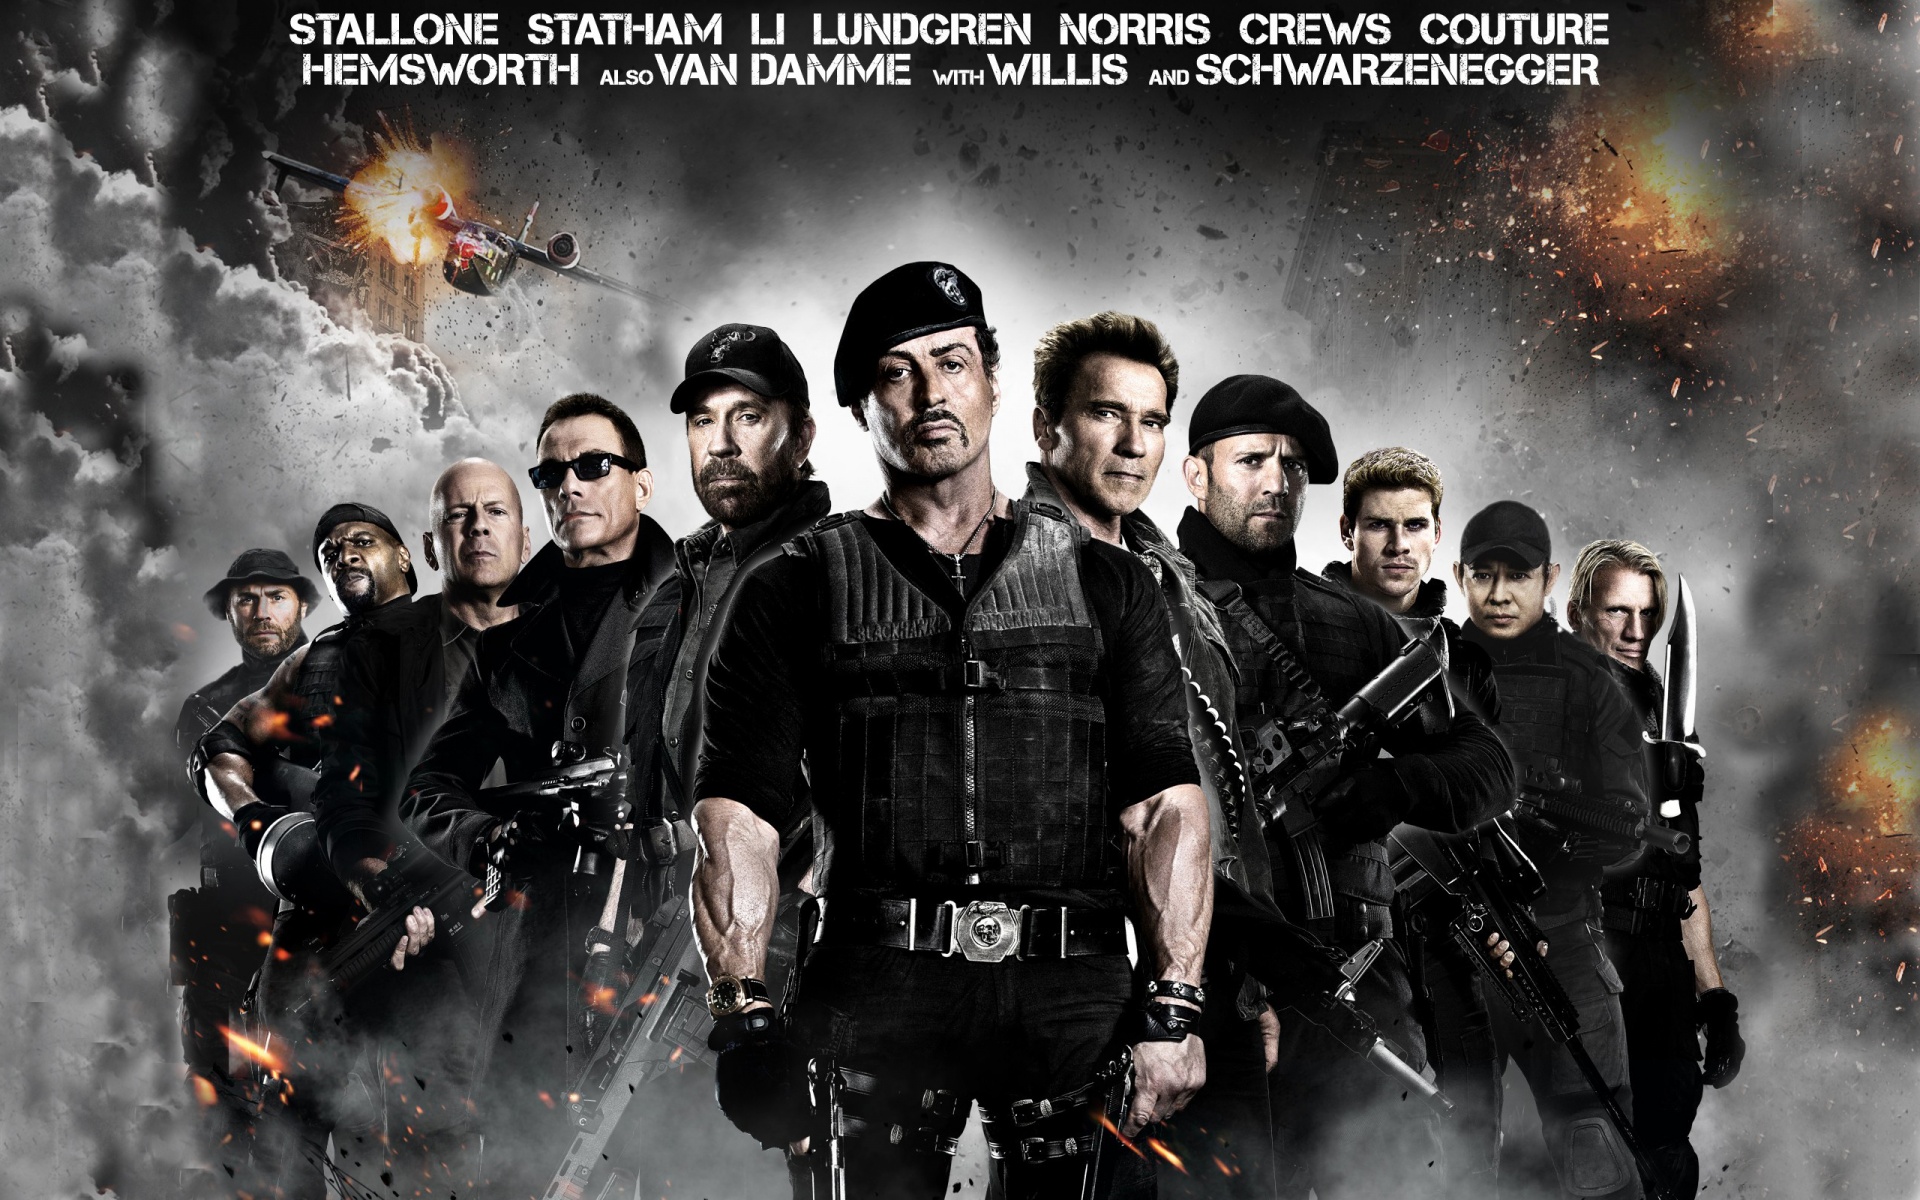 Free HD movie, the expendables 2, arnold schwarzenegger, barney ross, billy (the expendables), booker (the expendables), bruce willis, chuck norris, church (the expendables), dolph lundgren, gunnar jensen, hale caesar, jason statham, jean claude van damme, jet li, lee christmas, liam hemsworth, randy couture, sylvester stallone, terry crews, toll road, trench (the expendables), vilain (the expendables), yin yang (the expendables), the expendables